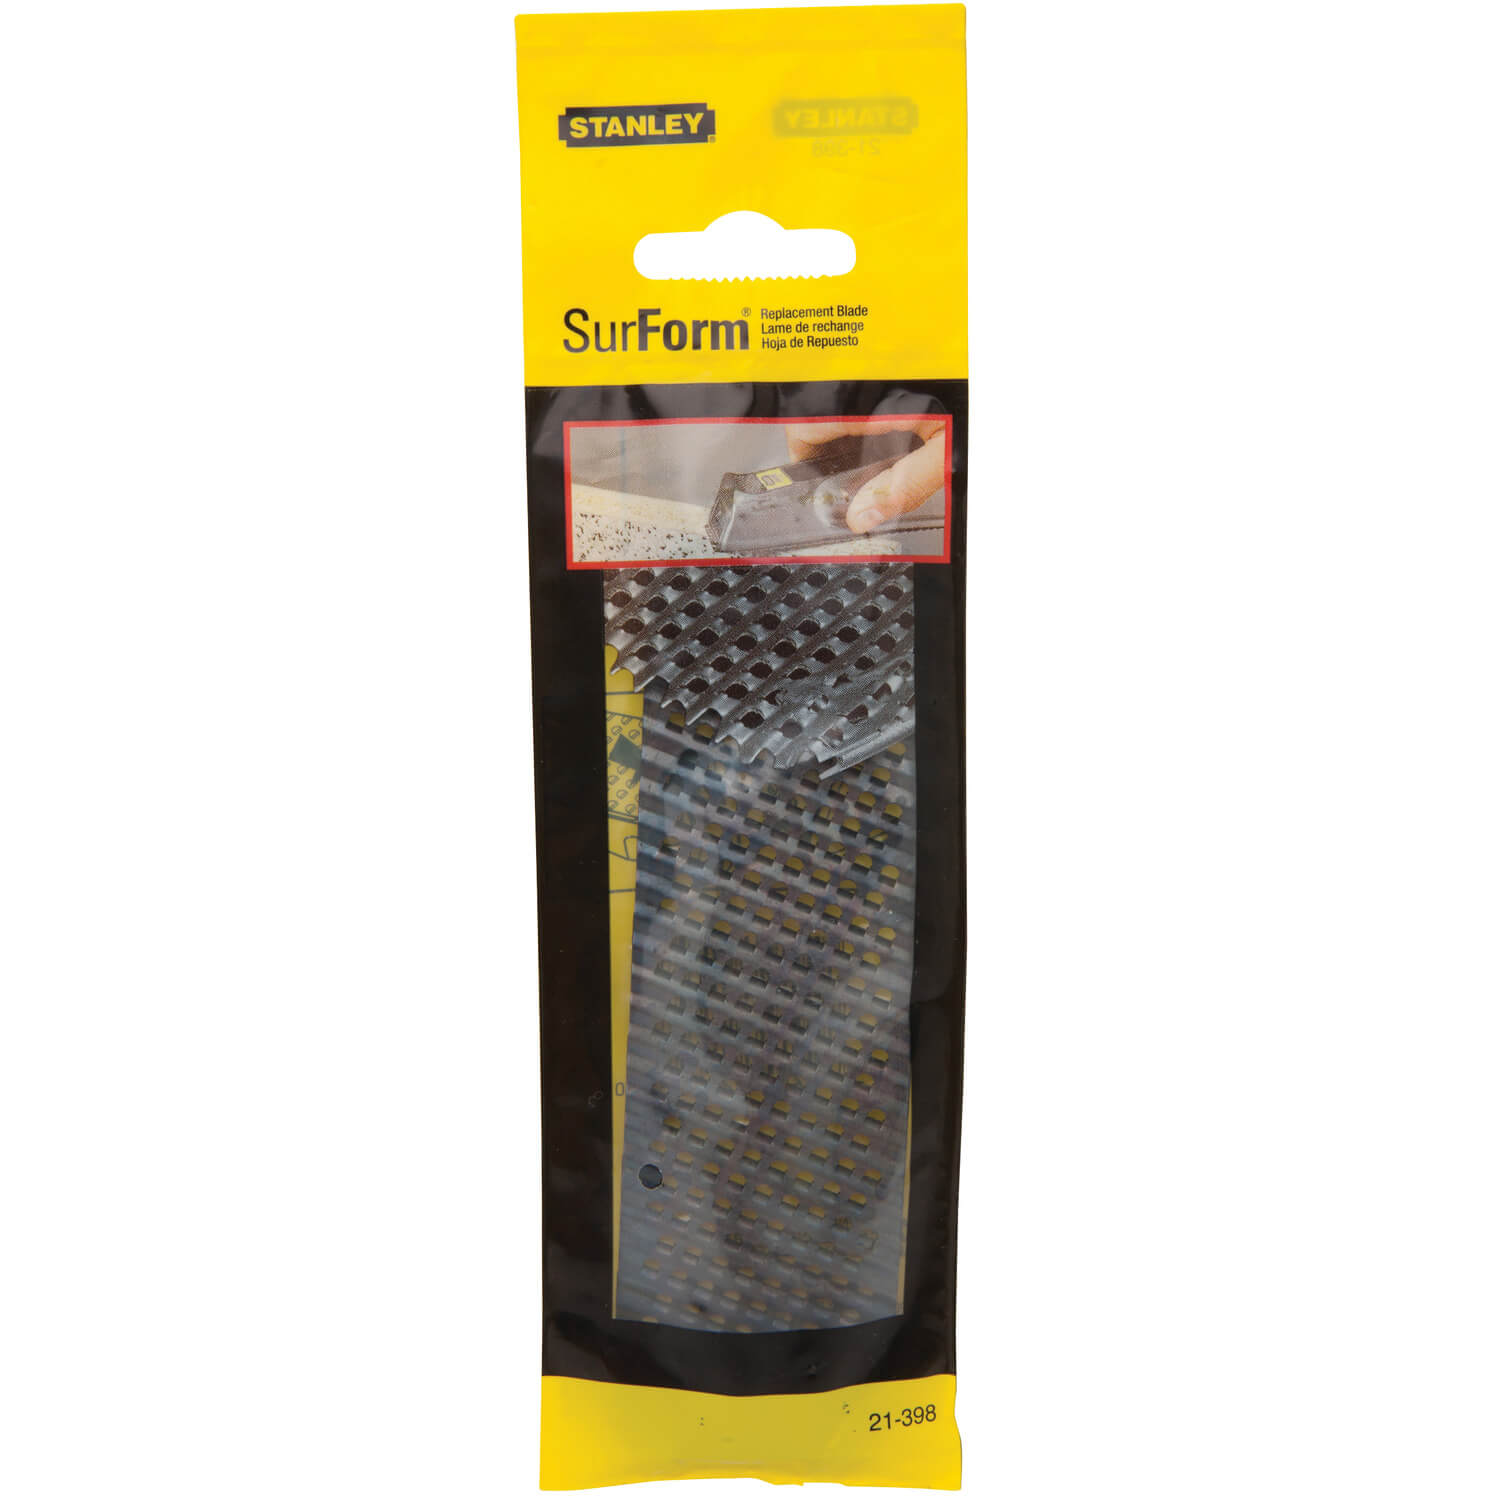 STANLEY 21-398  -   5-1/2 IN SURFORM® POCKET FINE CUT REPLACEMENT BLADE - wise-line-tools